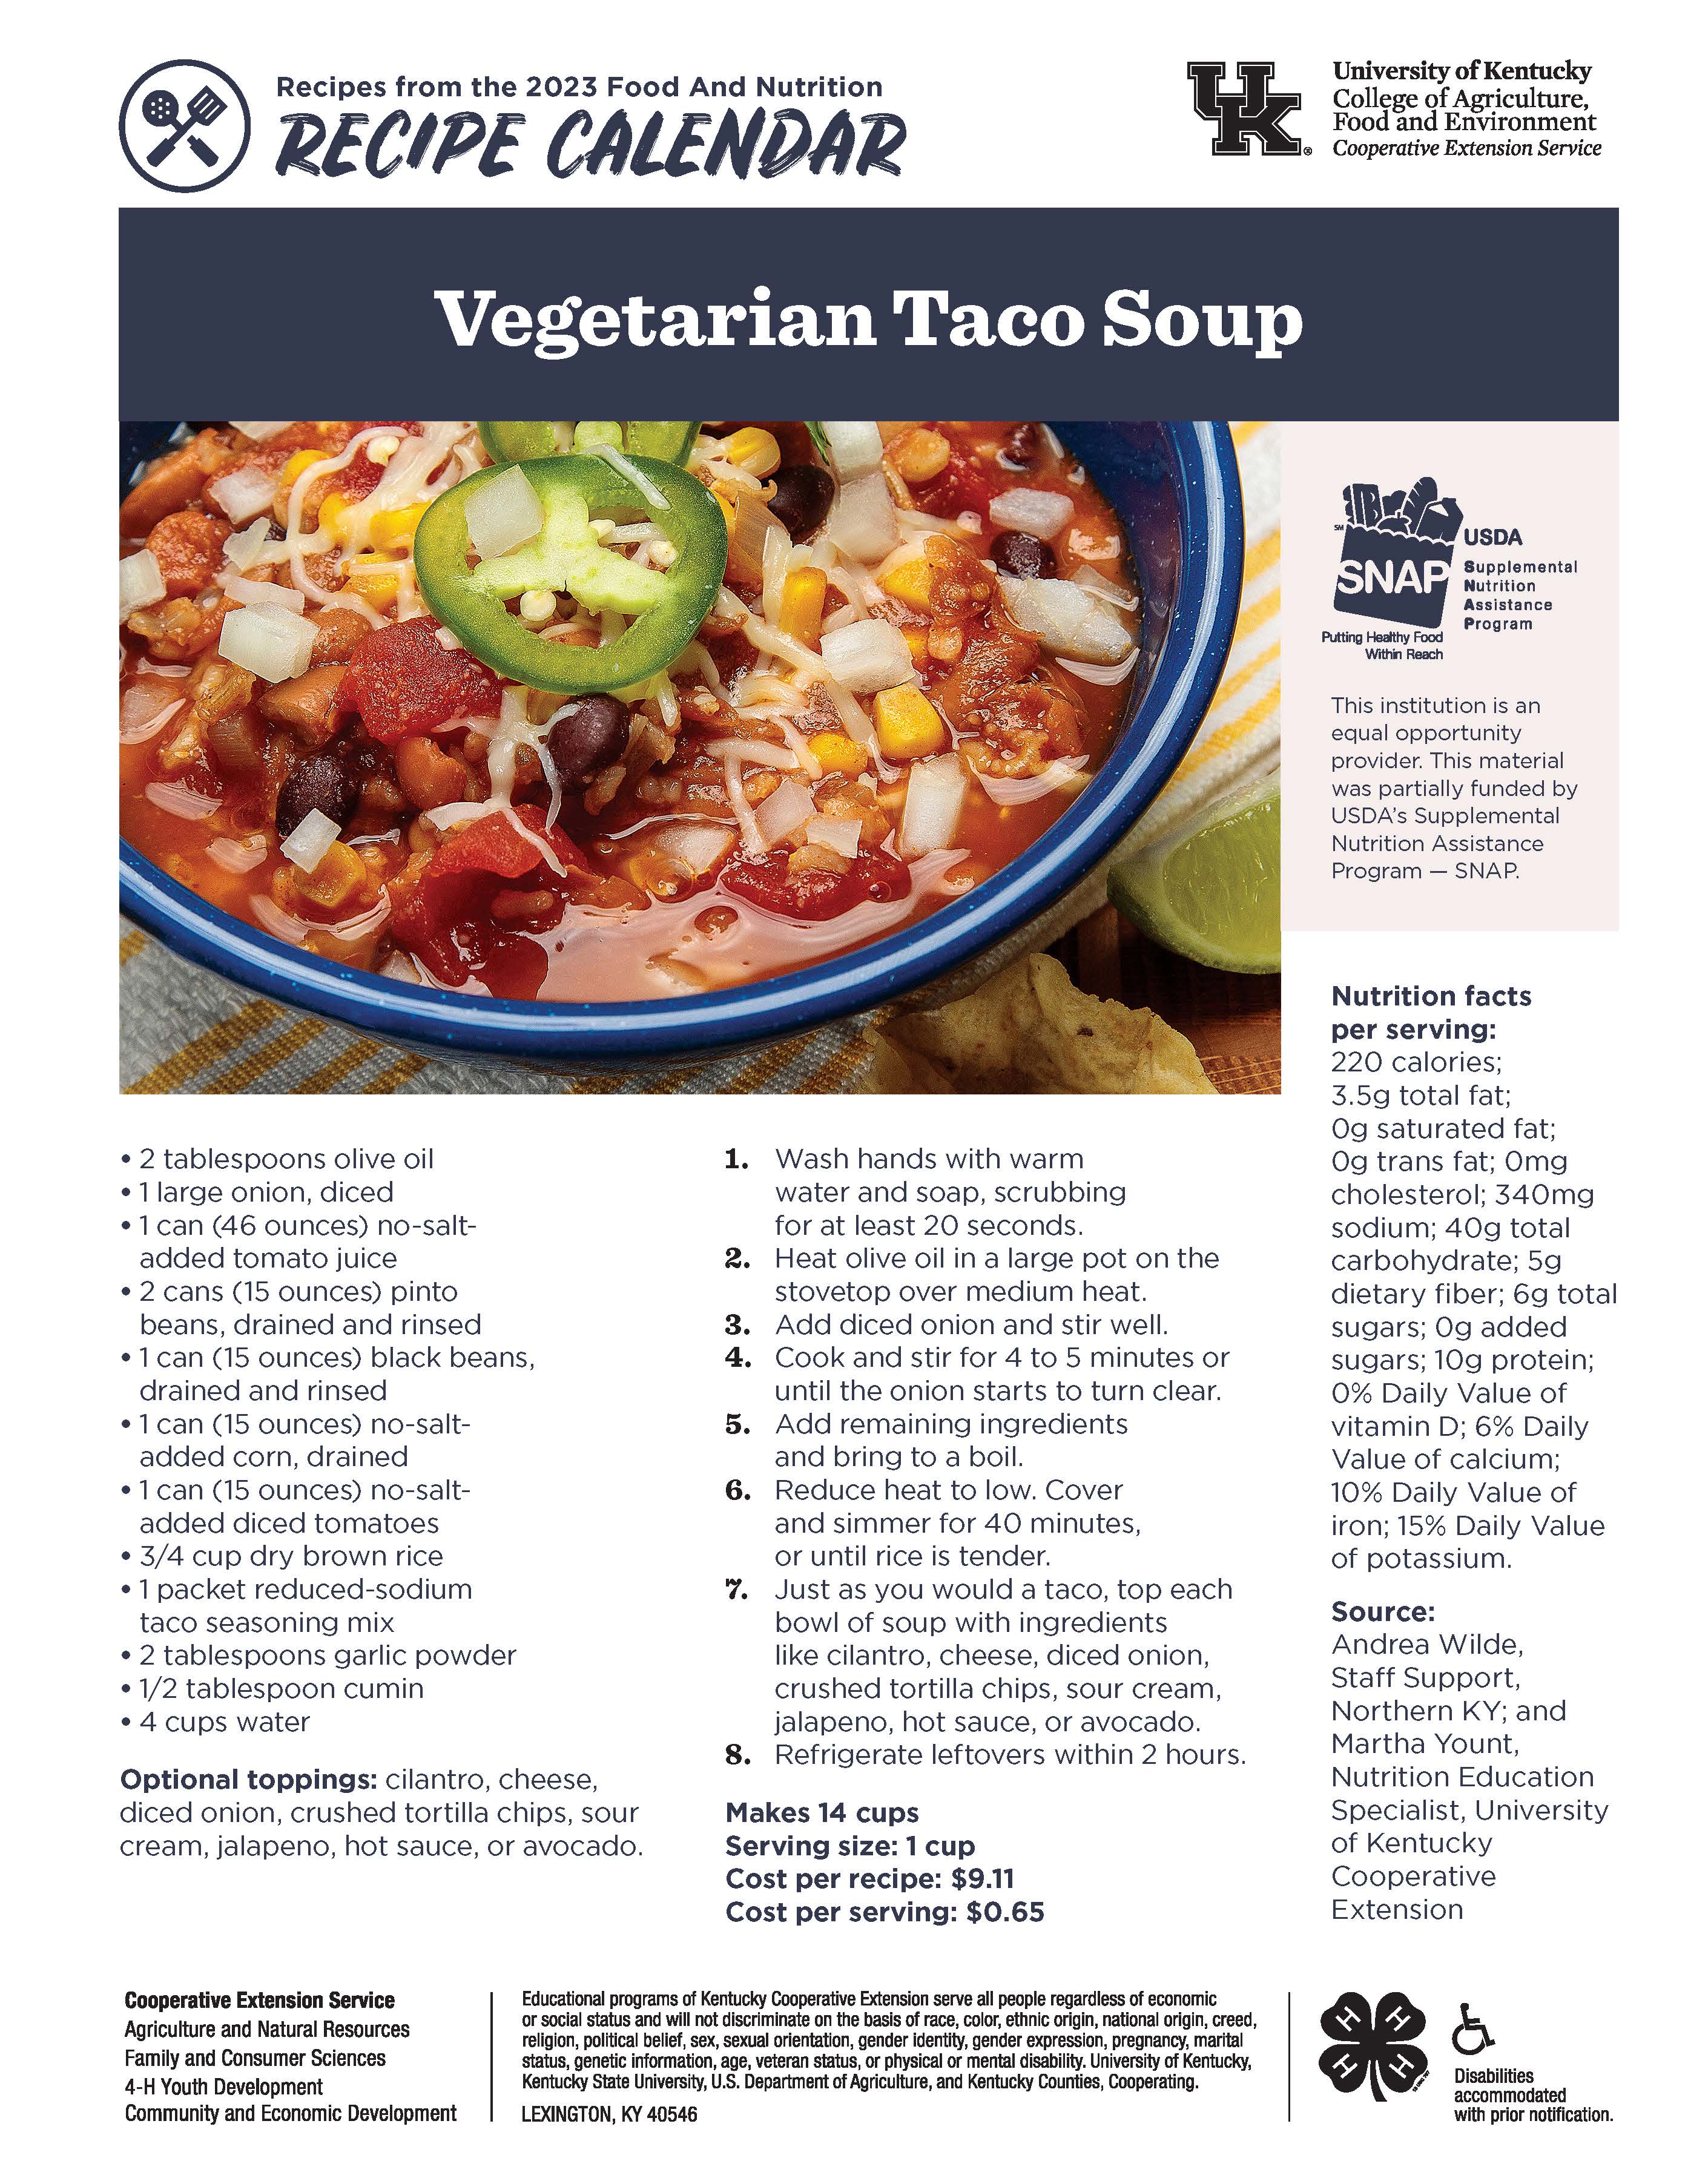 complete recipe for vegetarian taco soup